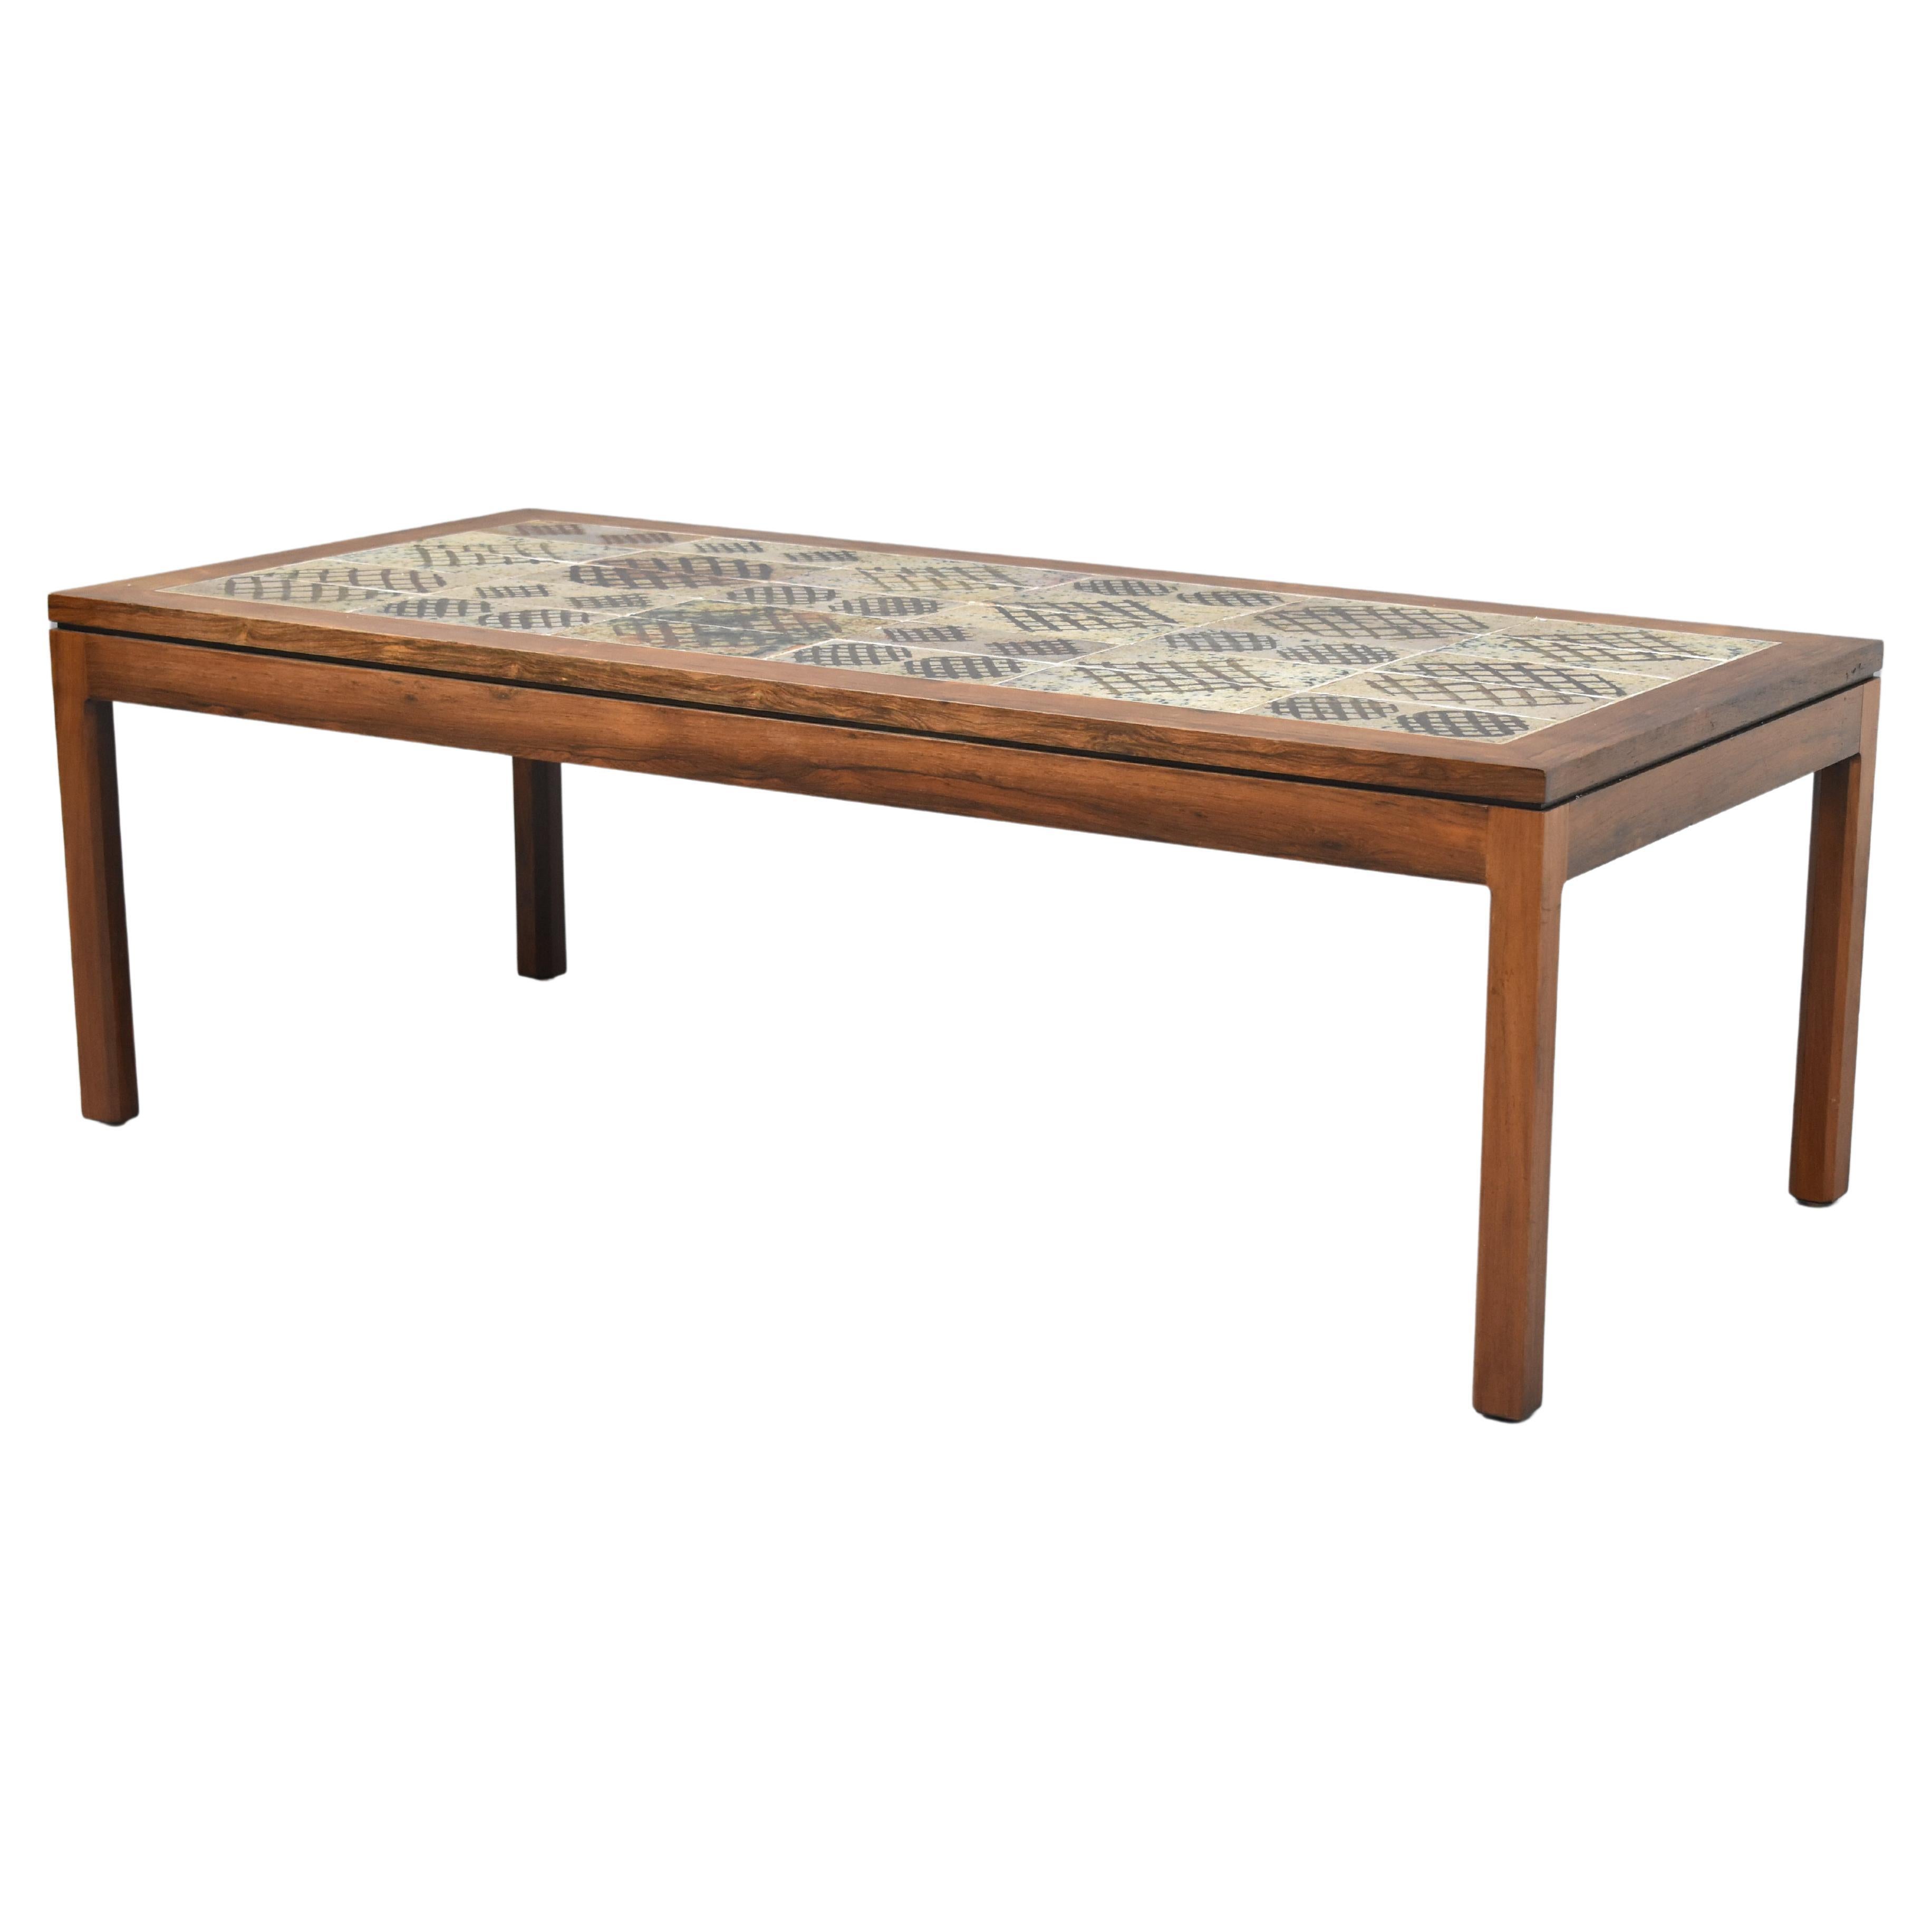 Vintage Rosewood and Tile Coffee Table For Sale